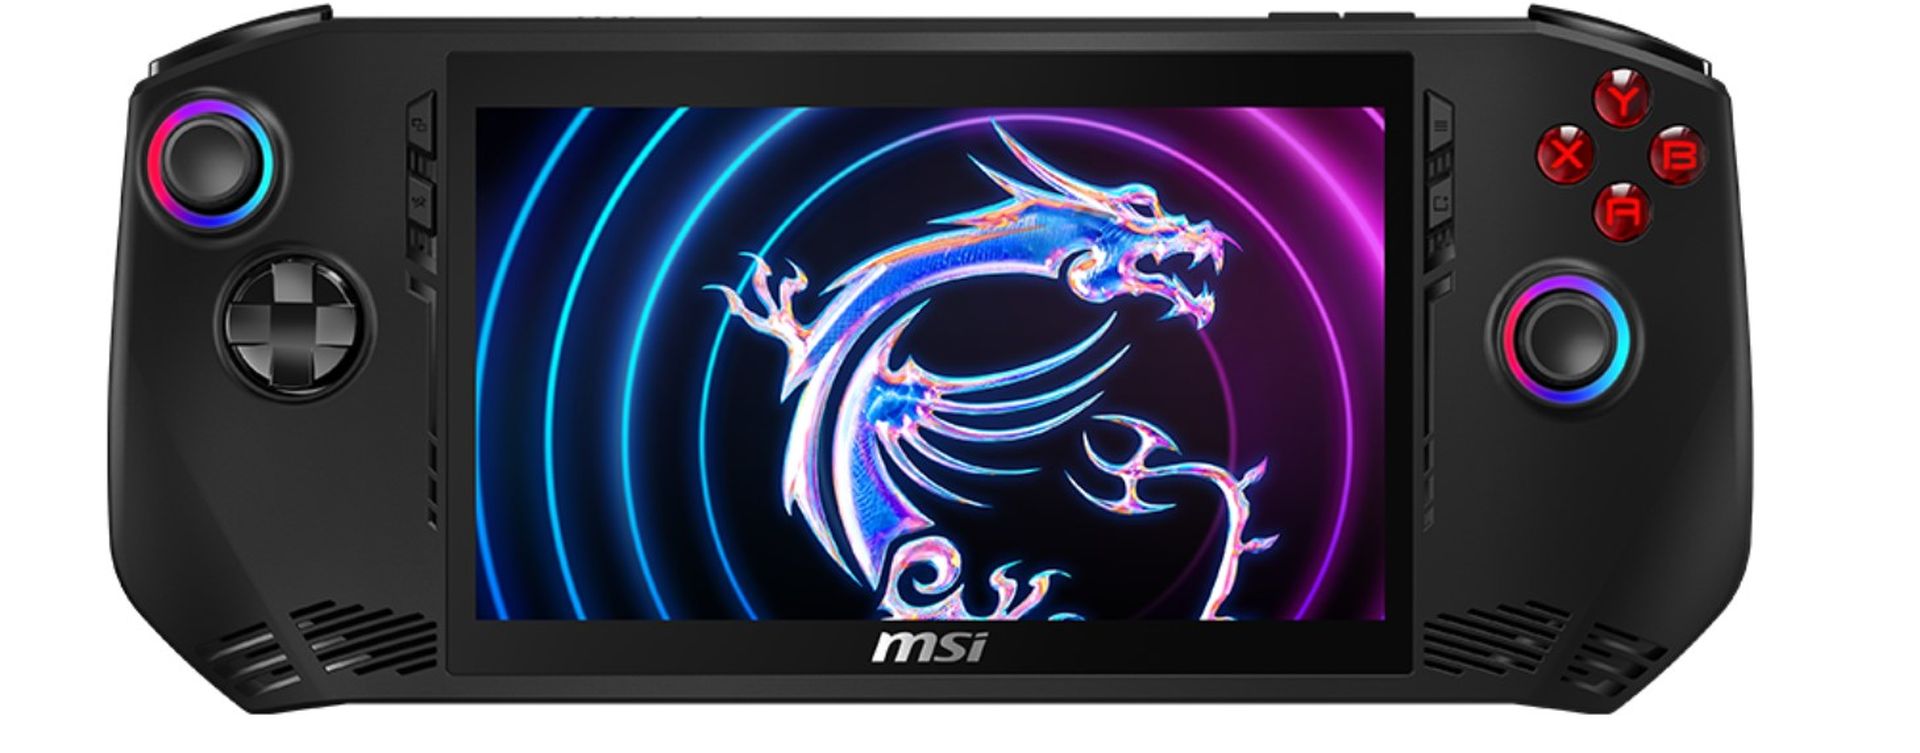 Meet MSI Claw, Steam Deck's competitor